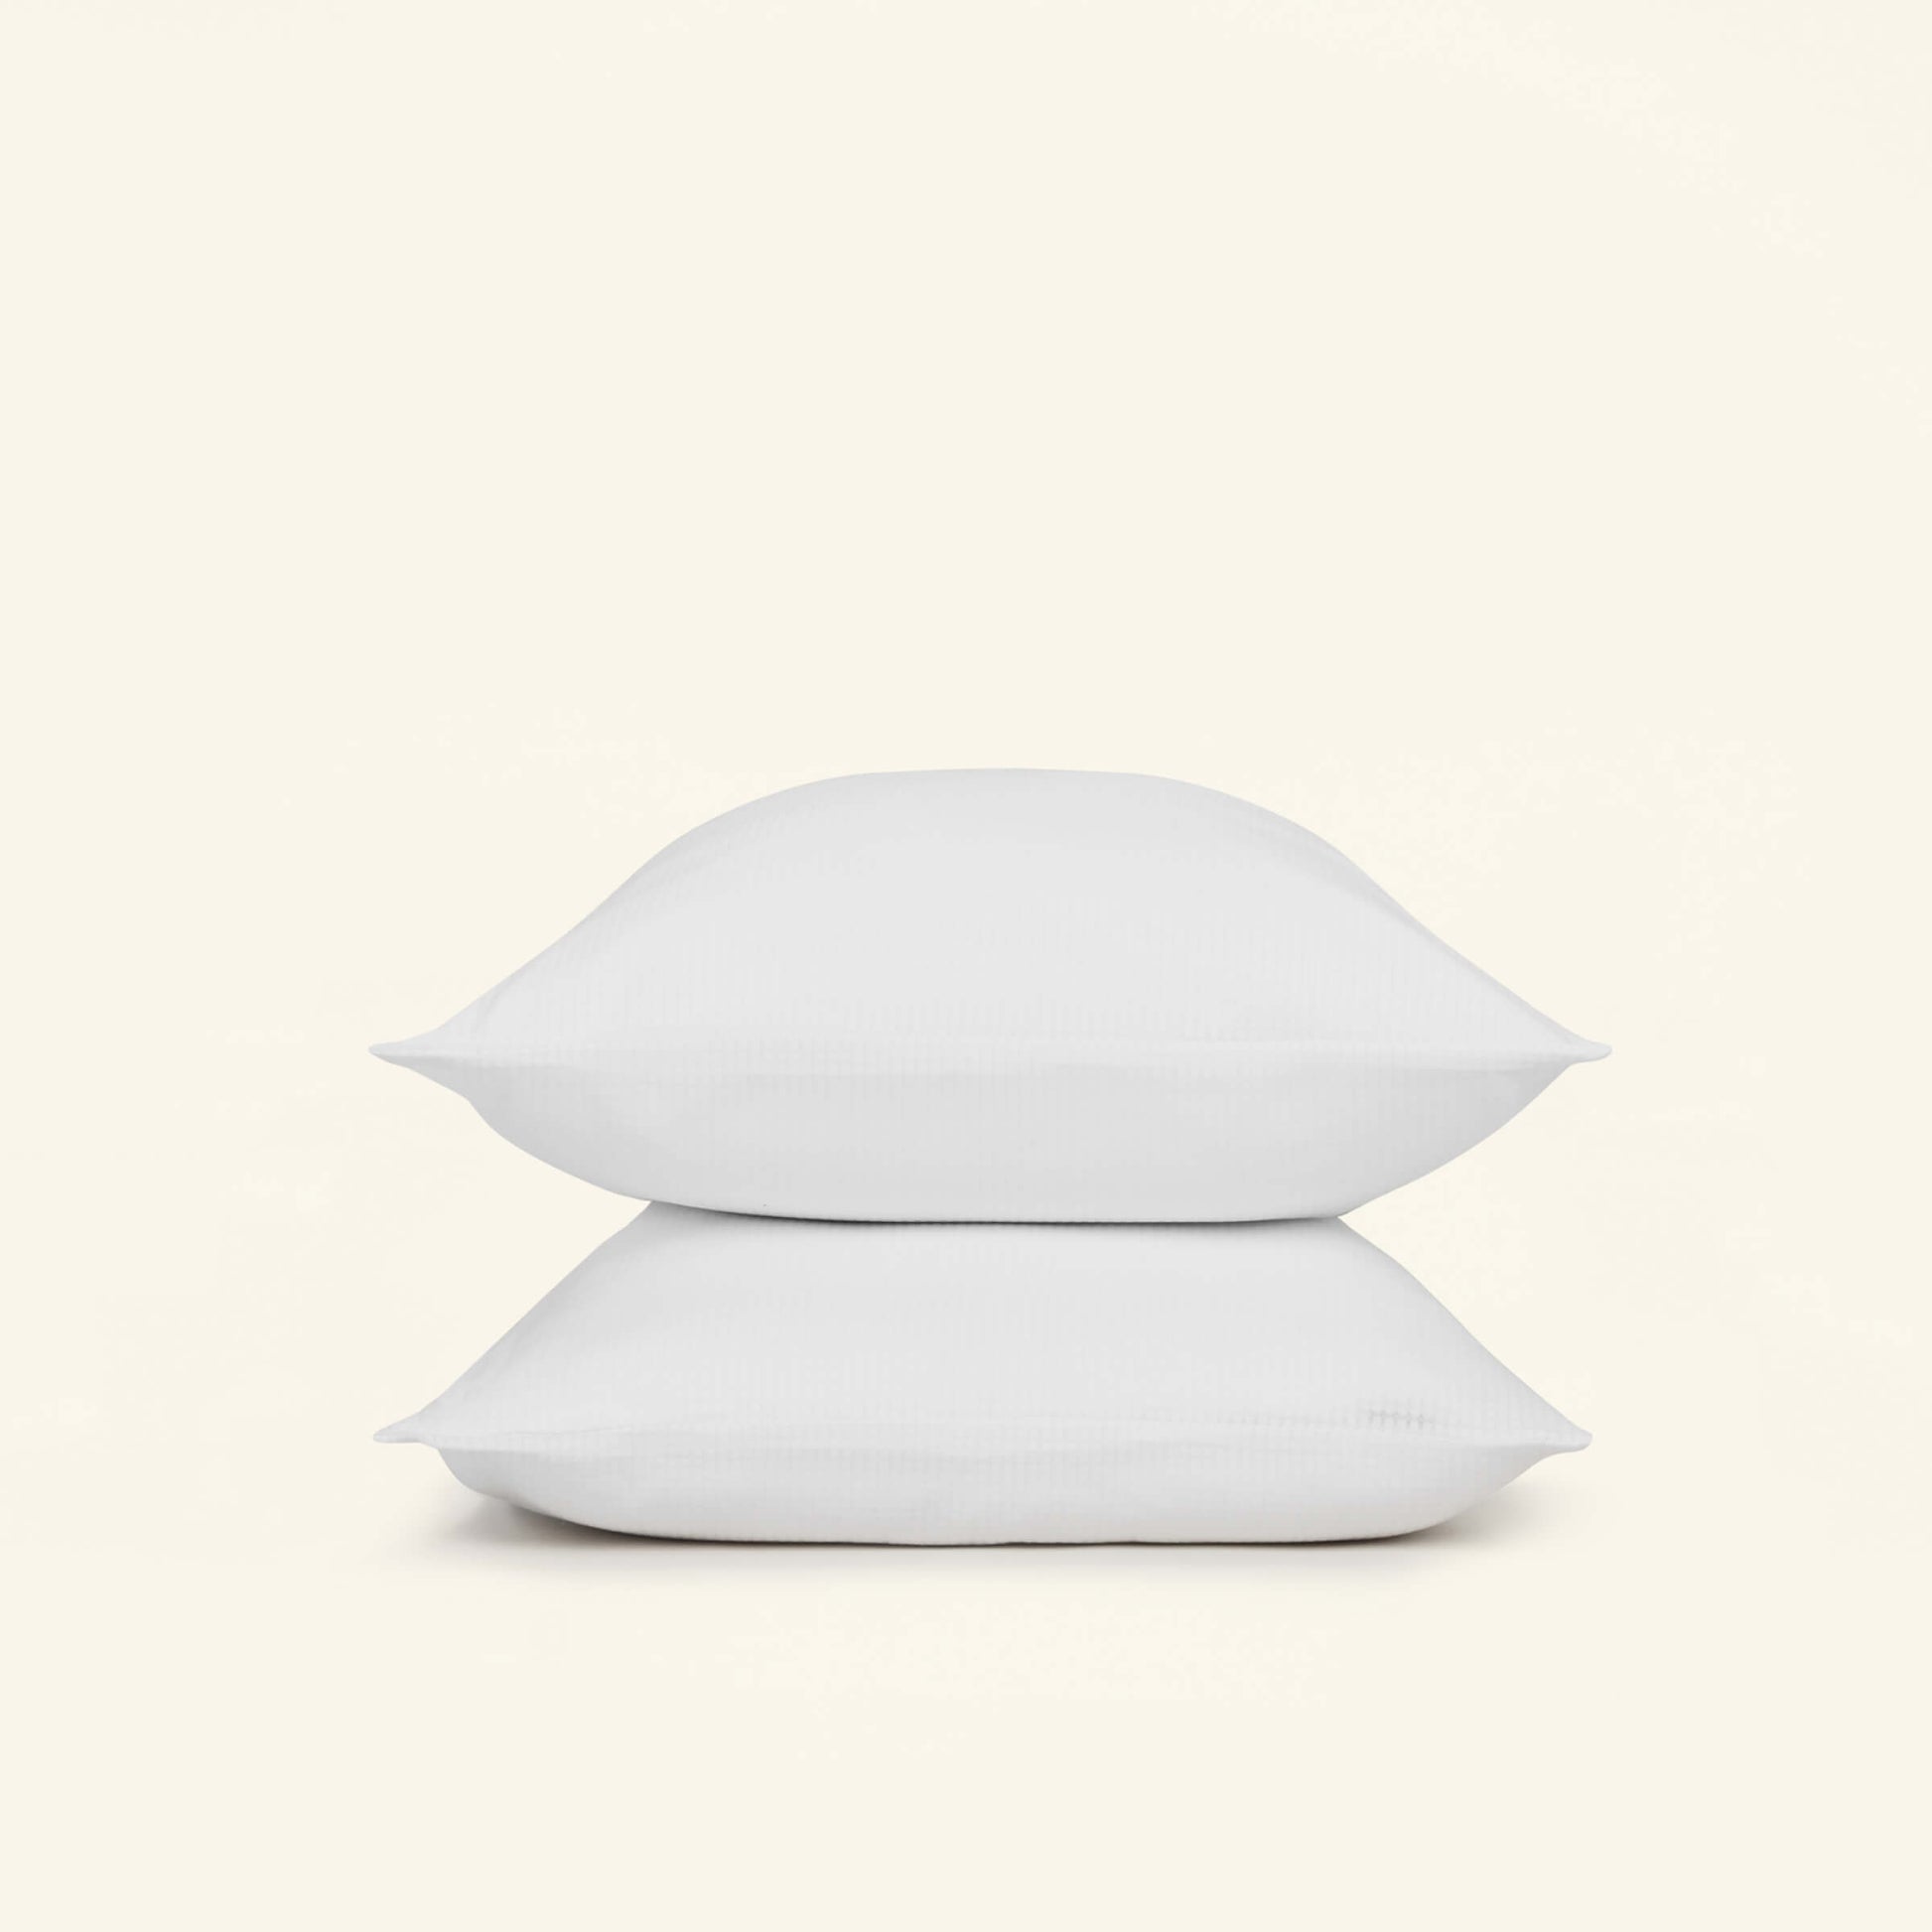 The Slumber Cloud Performance Pillow Cover made with Outlast temperature regulation technology and Tencel to help you stay cool through the night. 